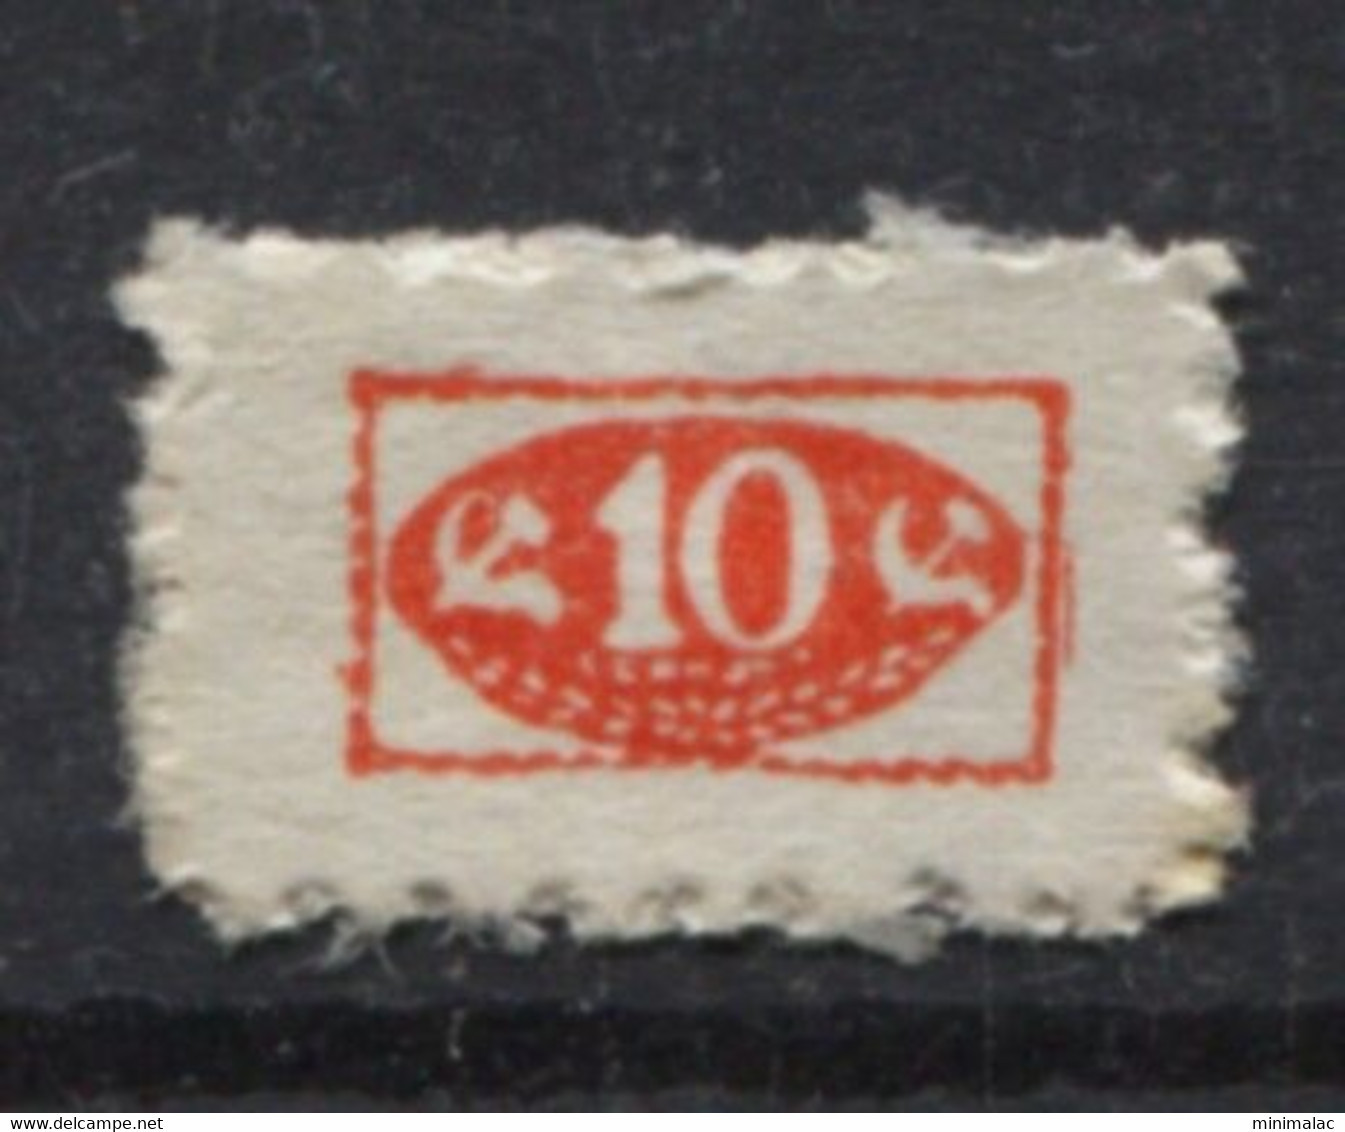 Yugoslavia 1959, Stamp For Membership SSRNJ, Labor Union, Administrative Stamp - Revenue, Tax Stamp,10d - Service